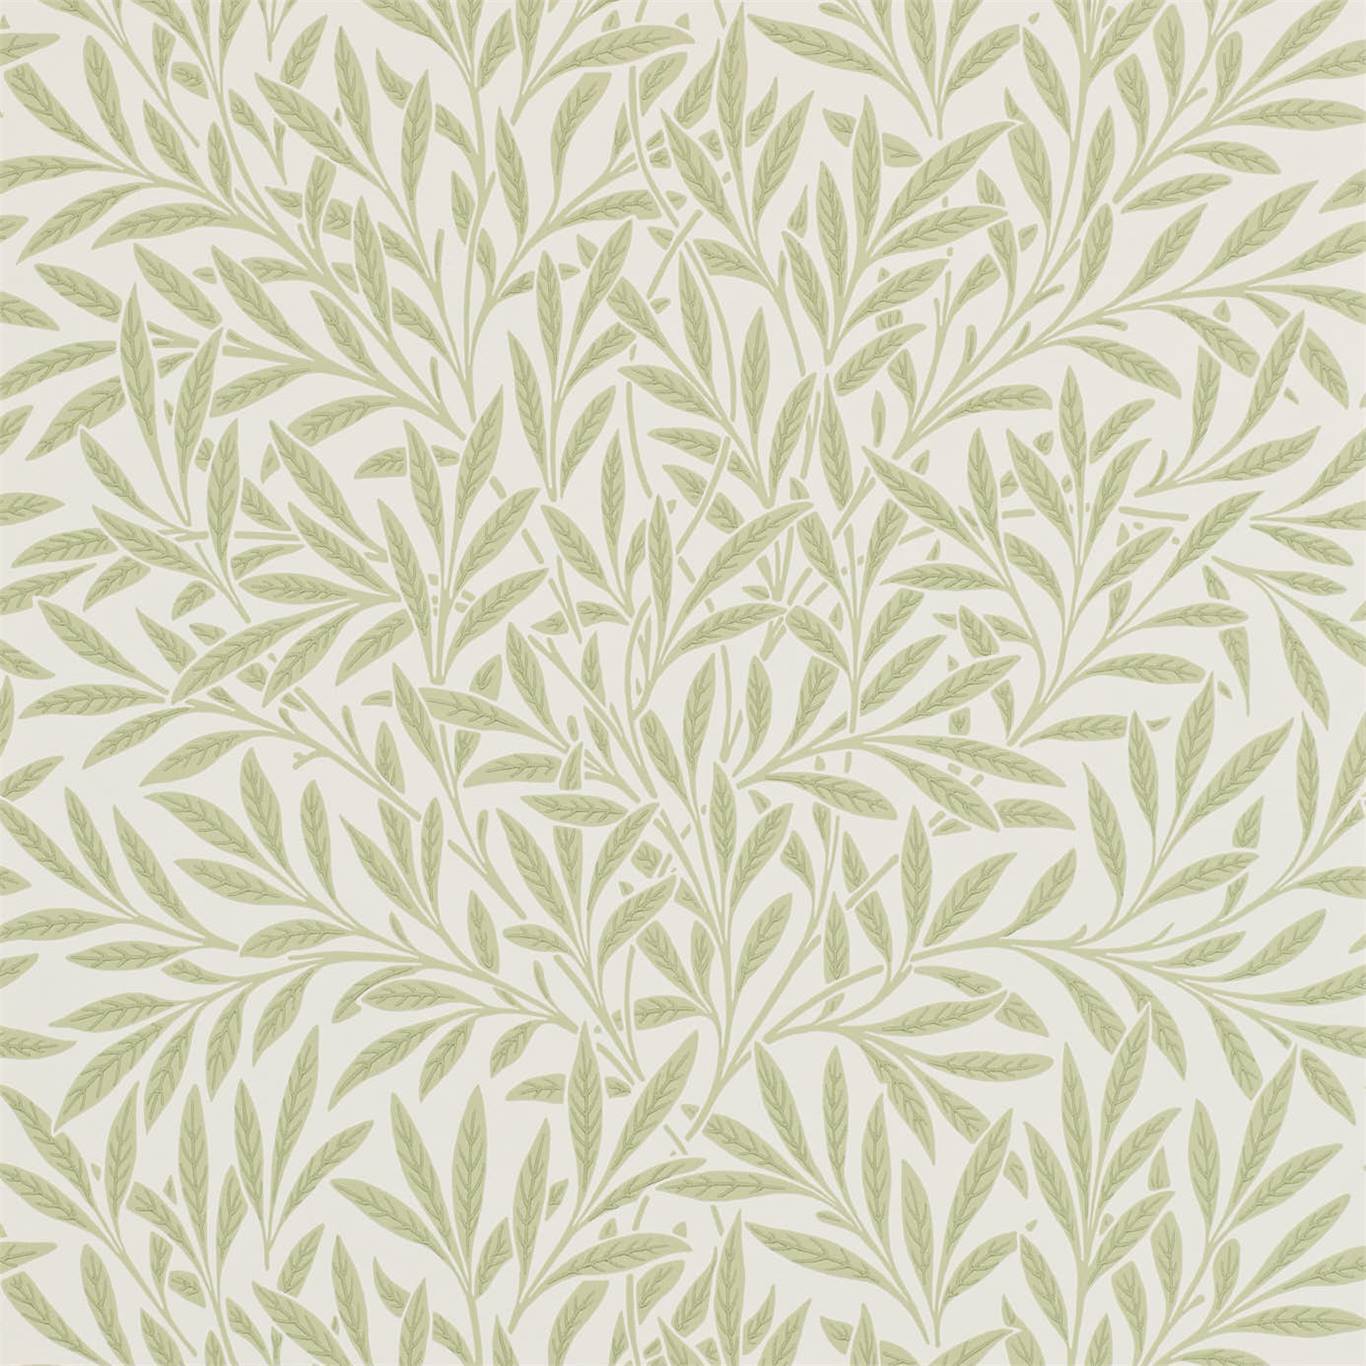 Willow Olive Wallpaper DCMW216835 by Morris & Co